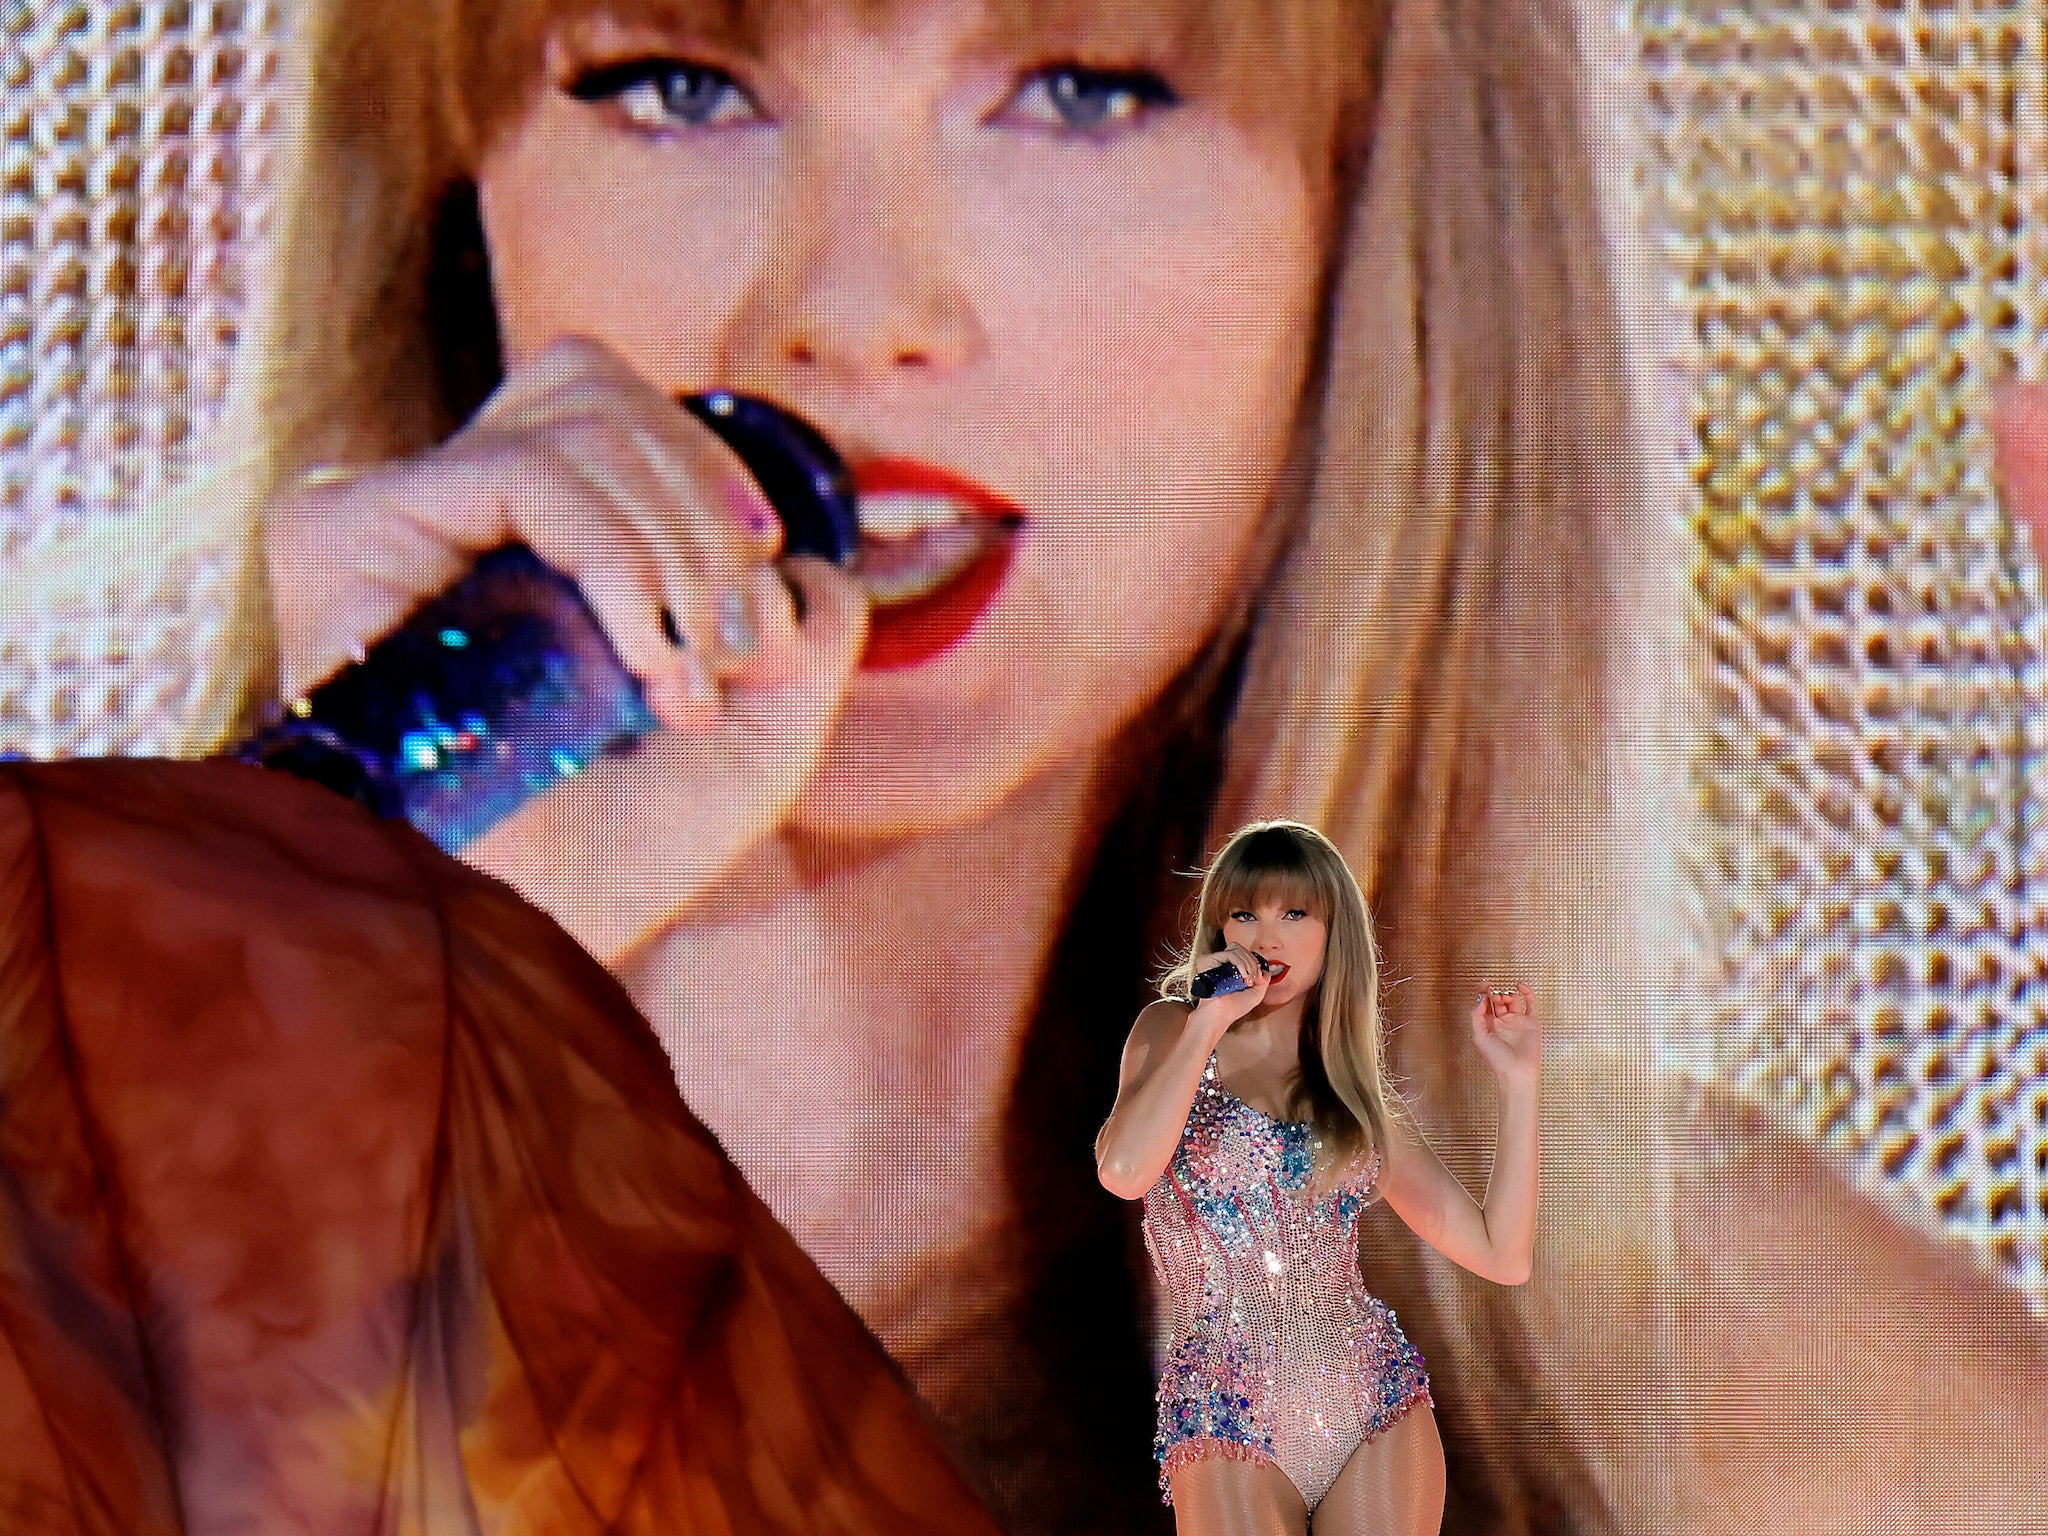 ERAzona: Taylor Swift performs onstage for the opening night of the Eras Tour in Glendale, Arizona